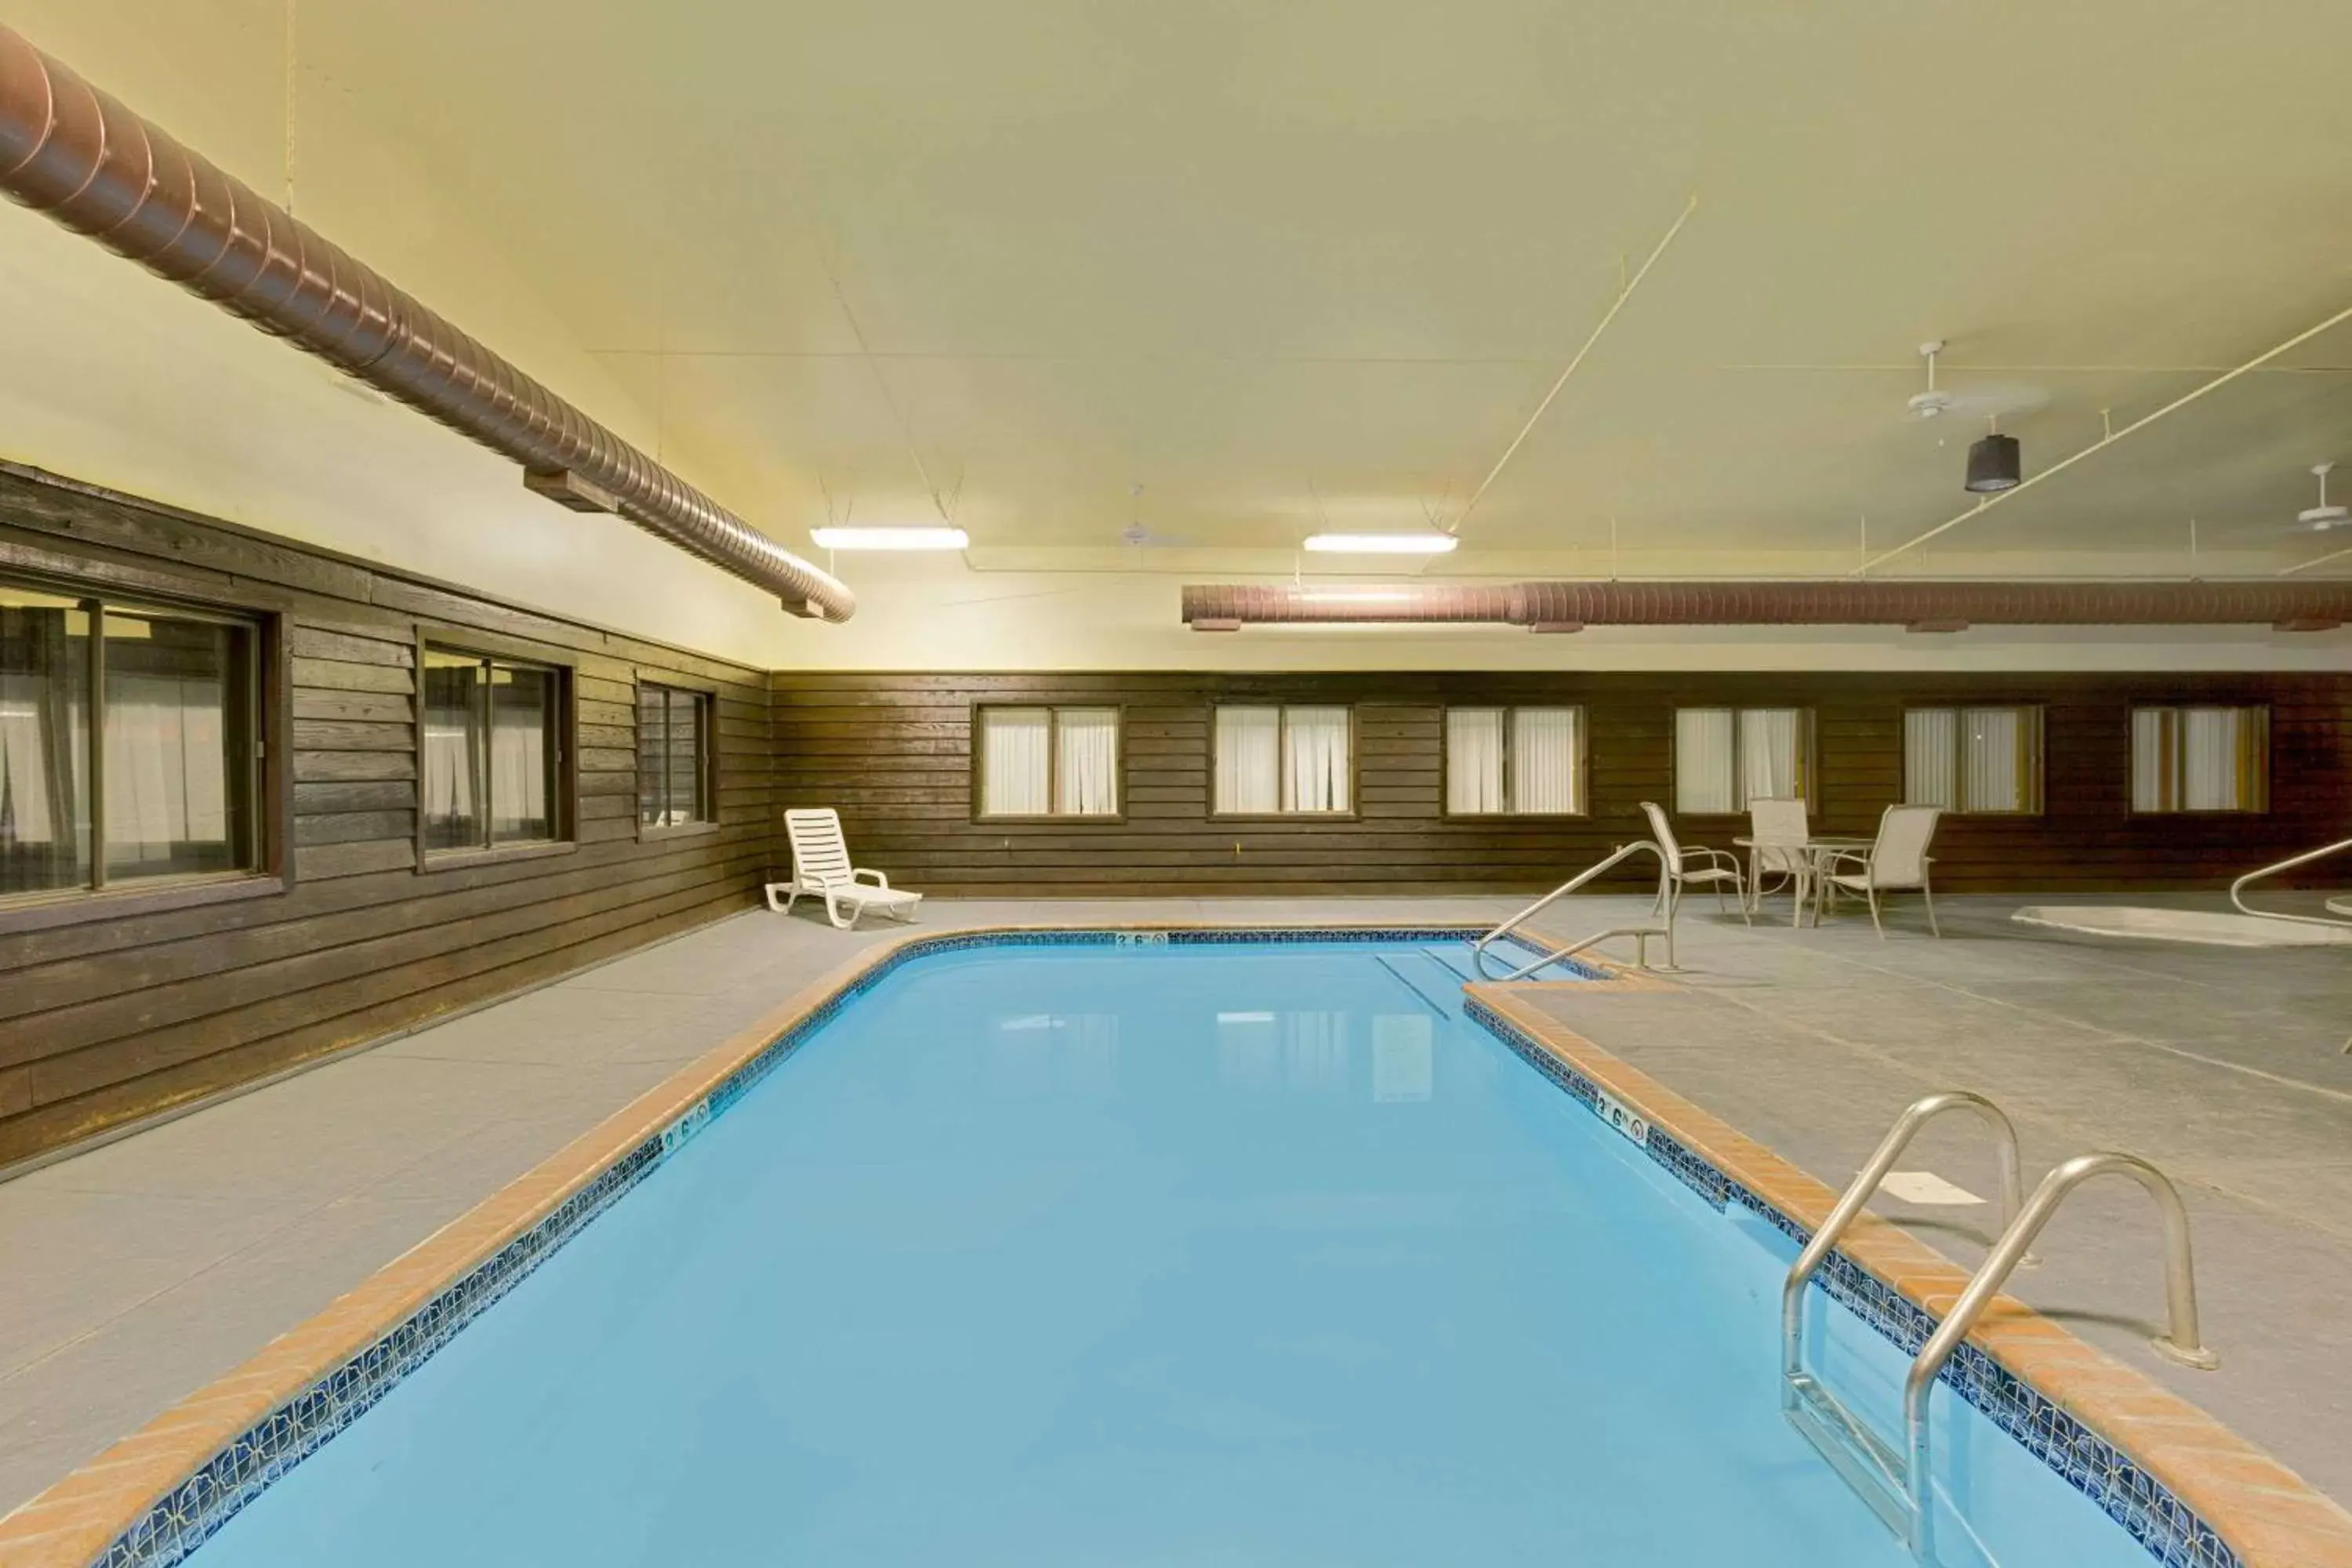 On site, Swimming Pool in Days Inn by Wyndham North Sioux City